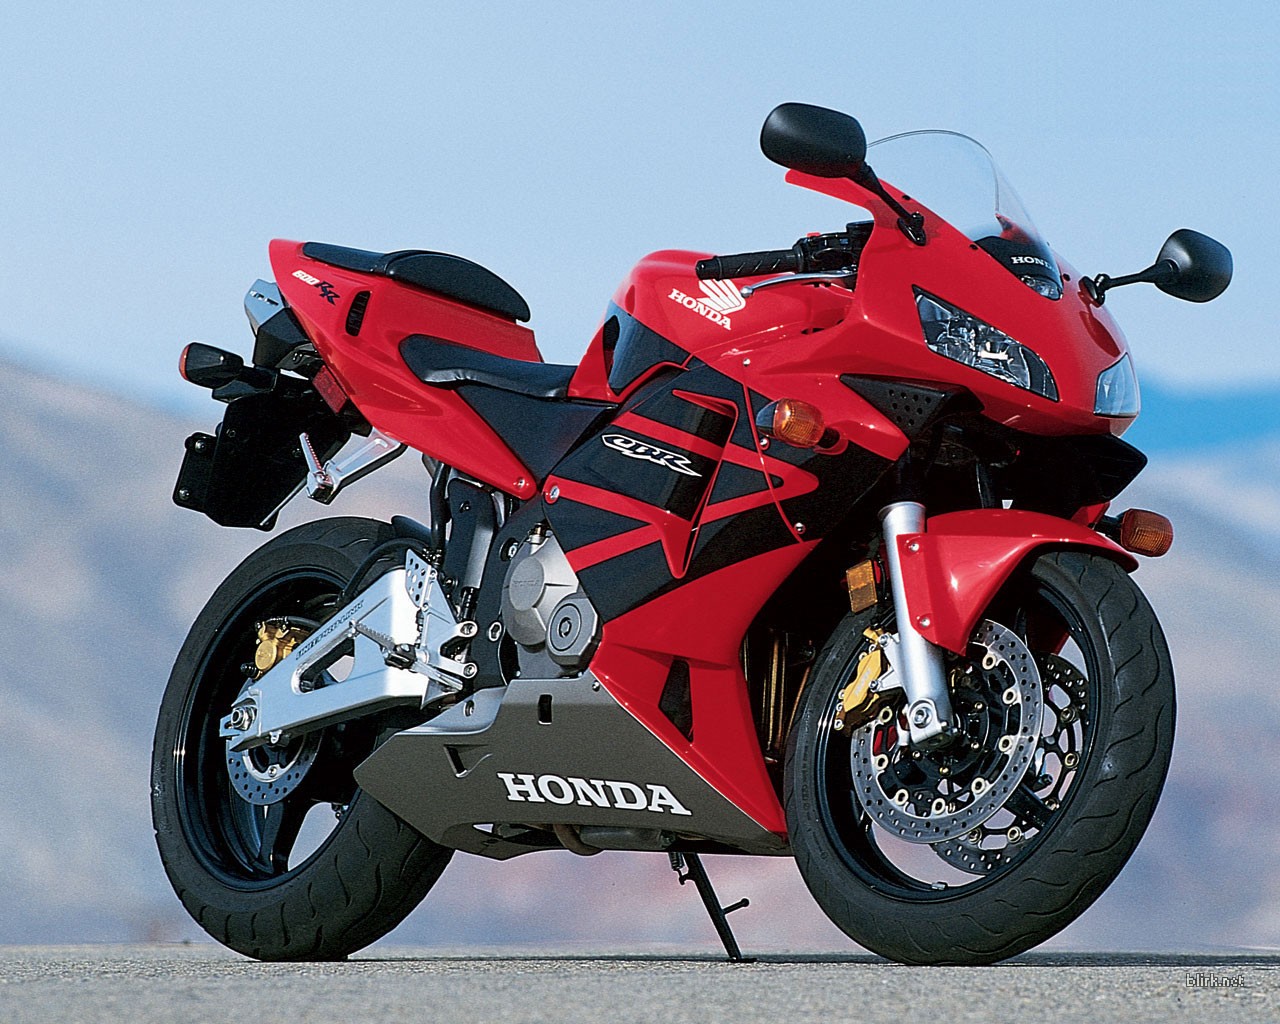 Motorcycle Review's: Amazing Honda CBR 600 RR